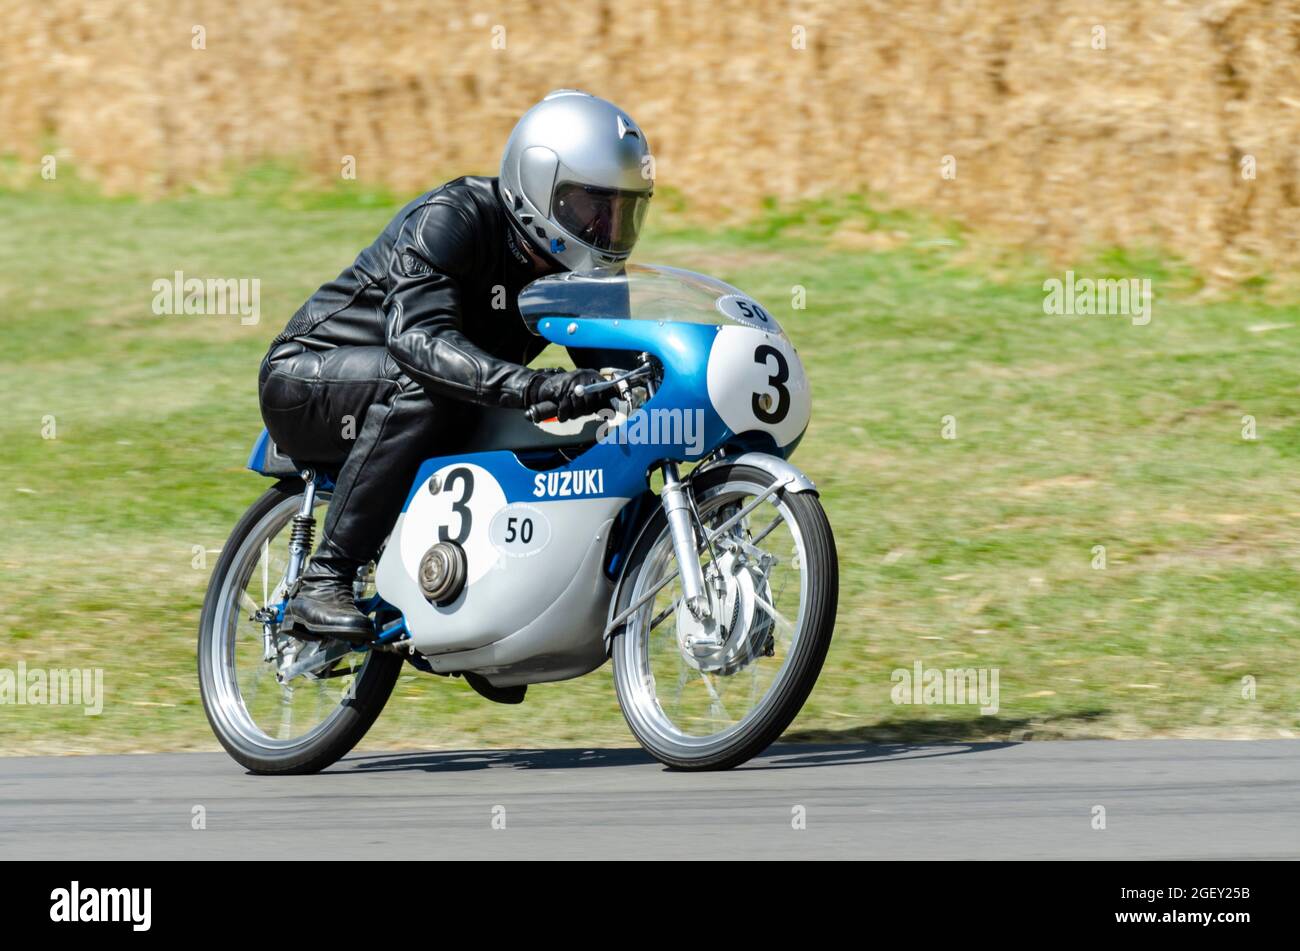 1964 Suzuki RM50 motorcycle racing up the hill climb track at the Goodwood Festival of Speed motor racing event 2014. Small motorbike Stock Photo